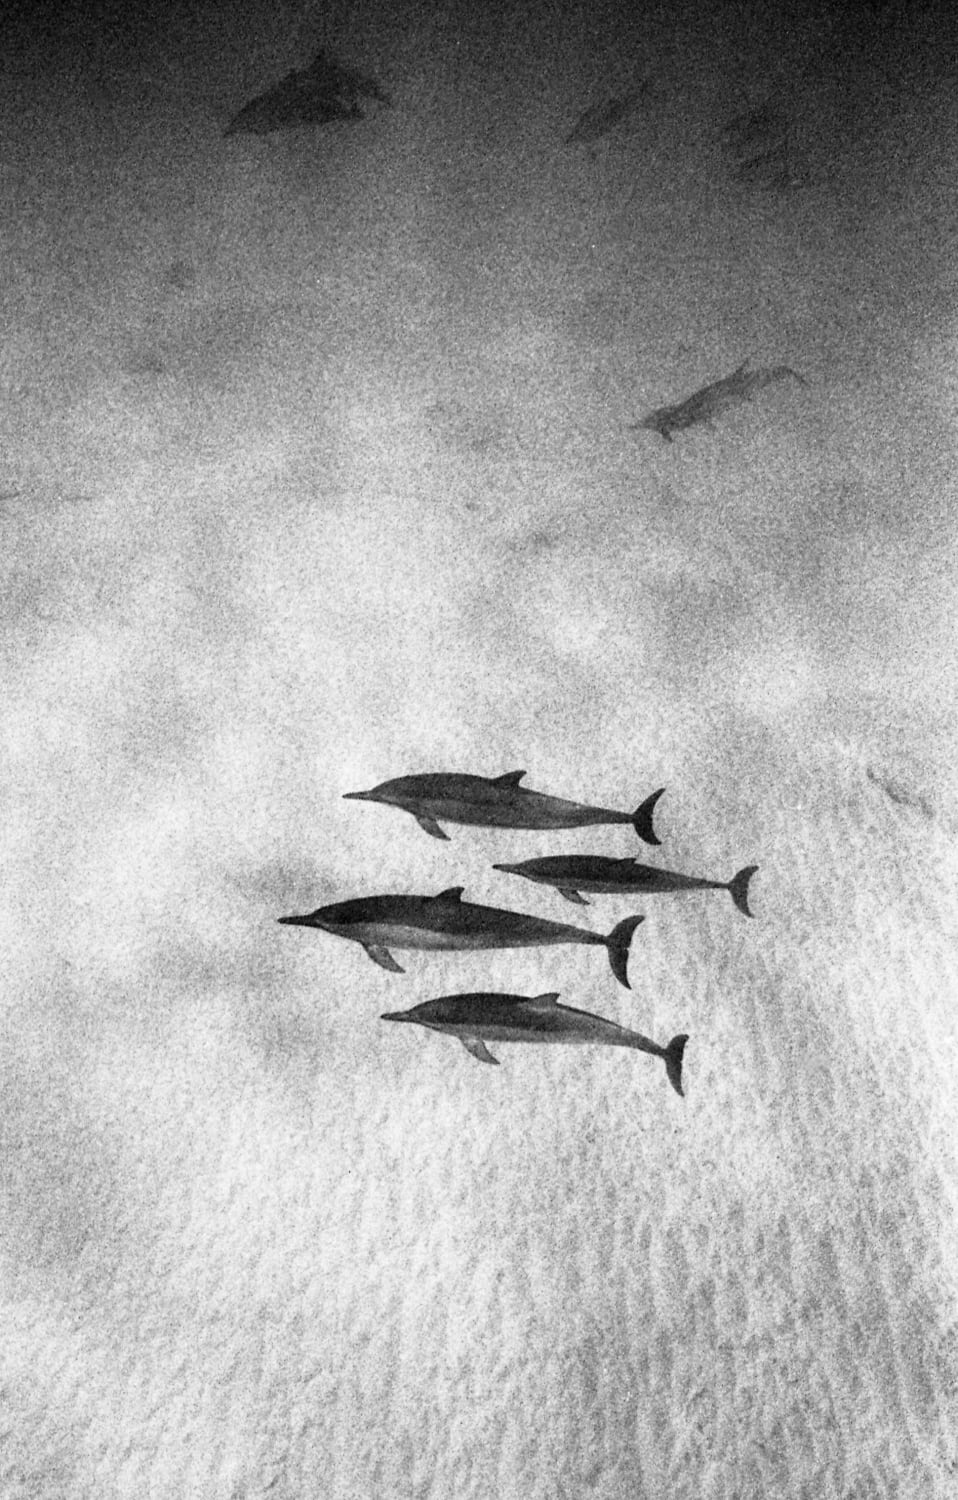 It was a really quiet, calm morning in the water. We saw some splashing in the distance and stayed on the surface where we were - sure enough, a pod of spinners swam past and I managed to take *three* photos. Lucky shot! Nikonos v/hp5